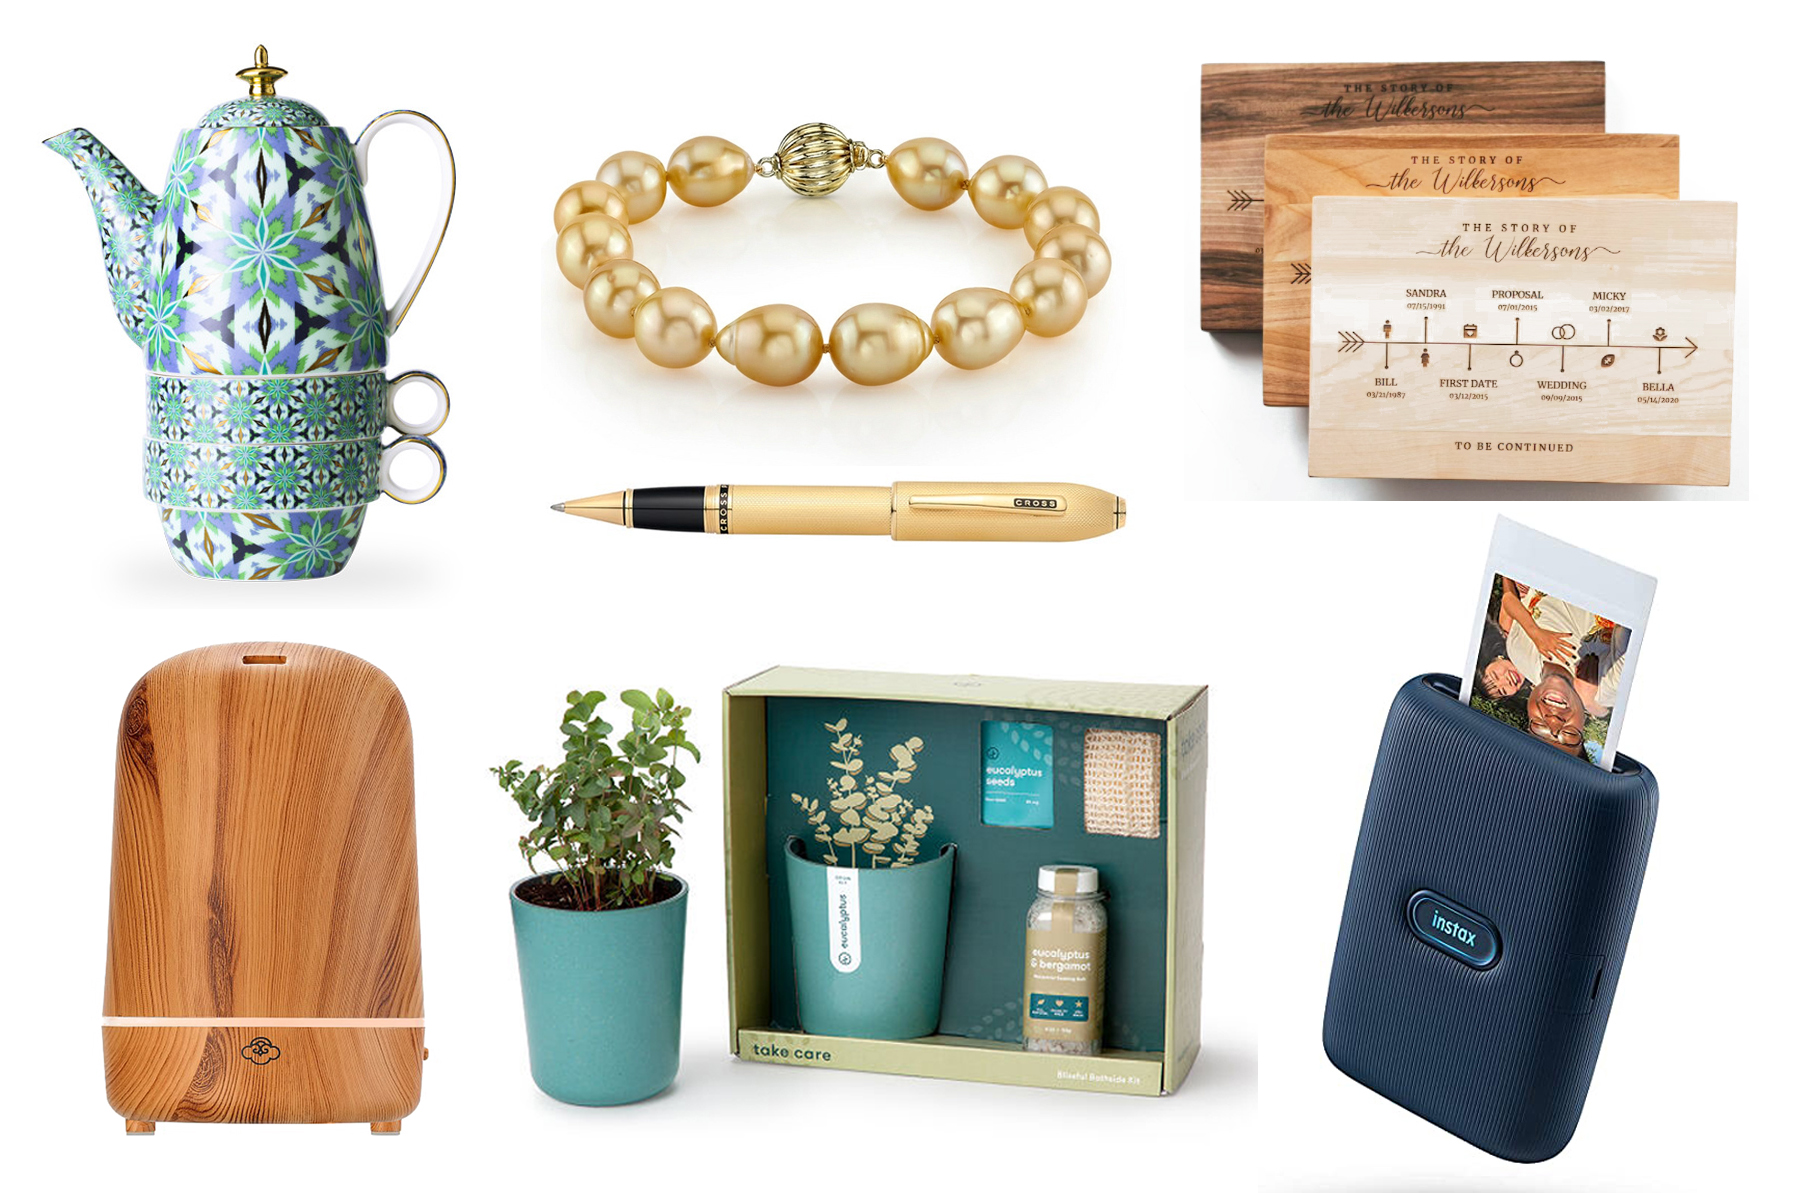 The Best 2021 Gifts for Parents Guide - The Pearl Source